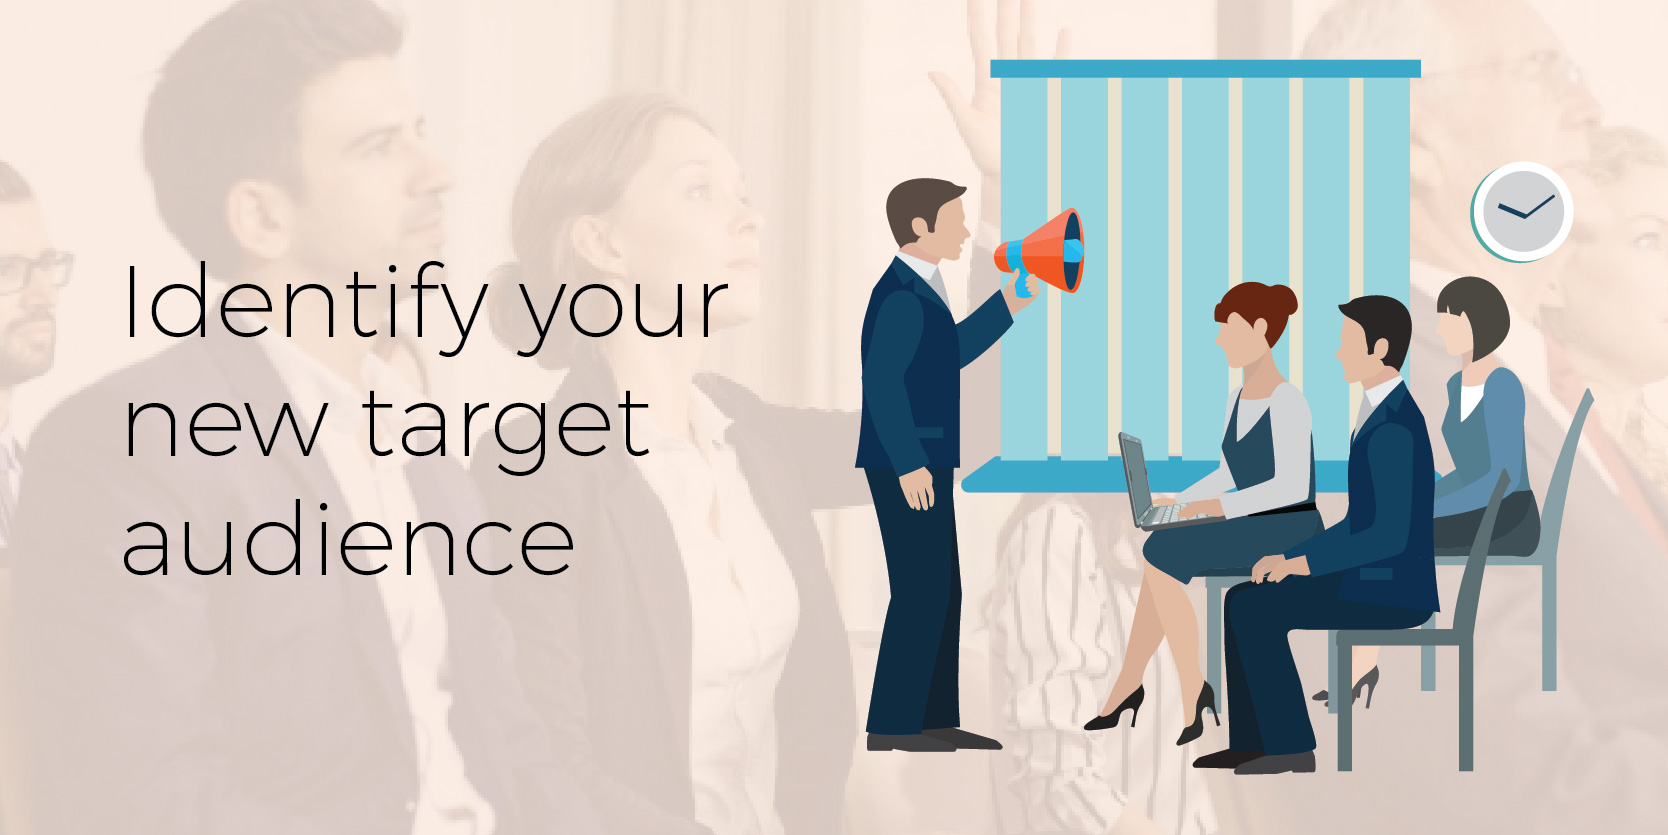 Identify your new target audience